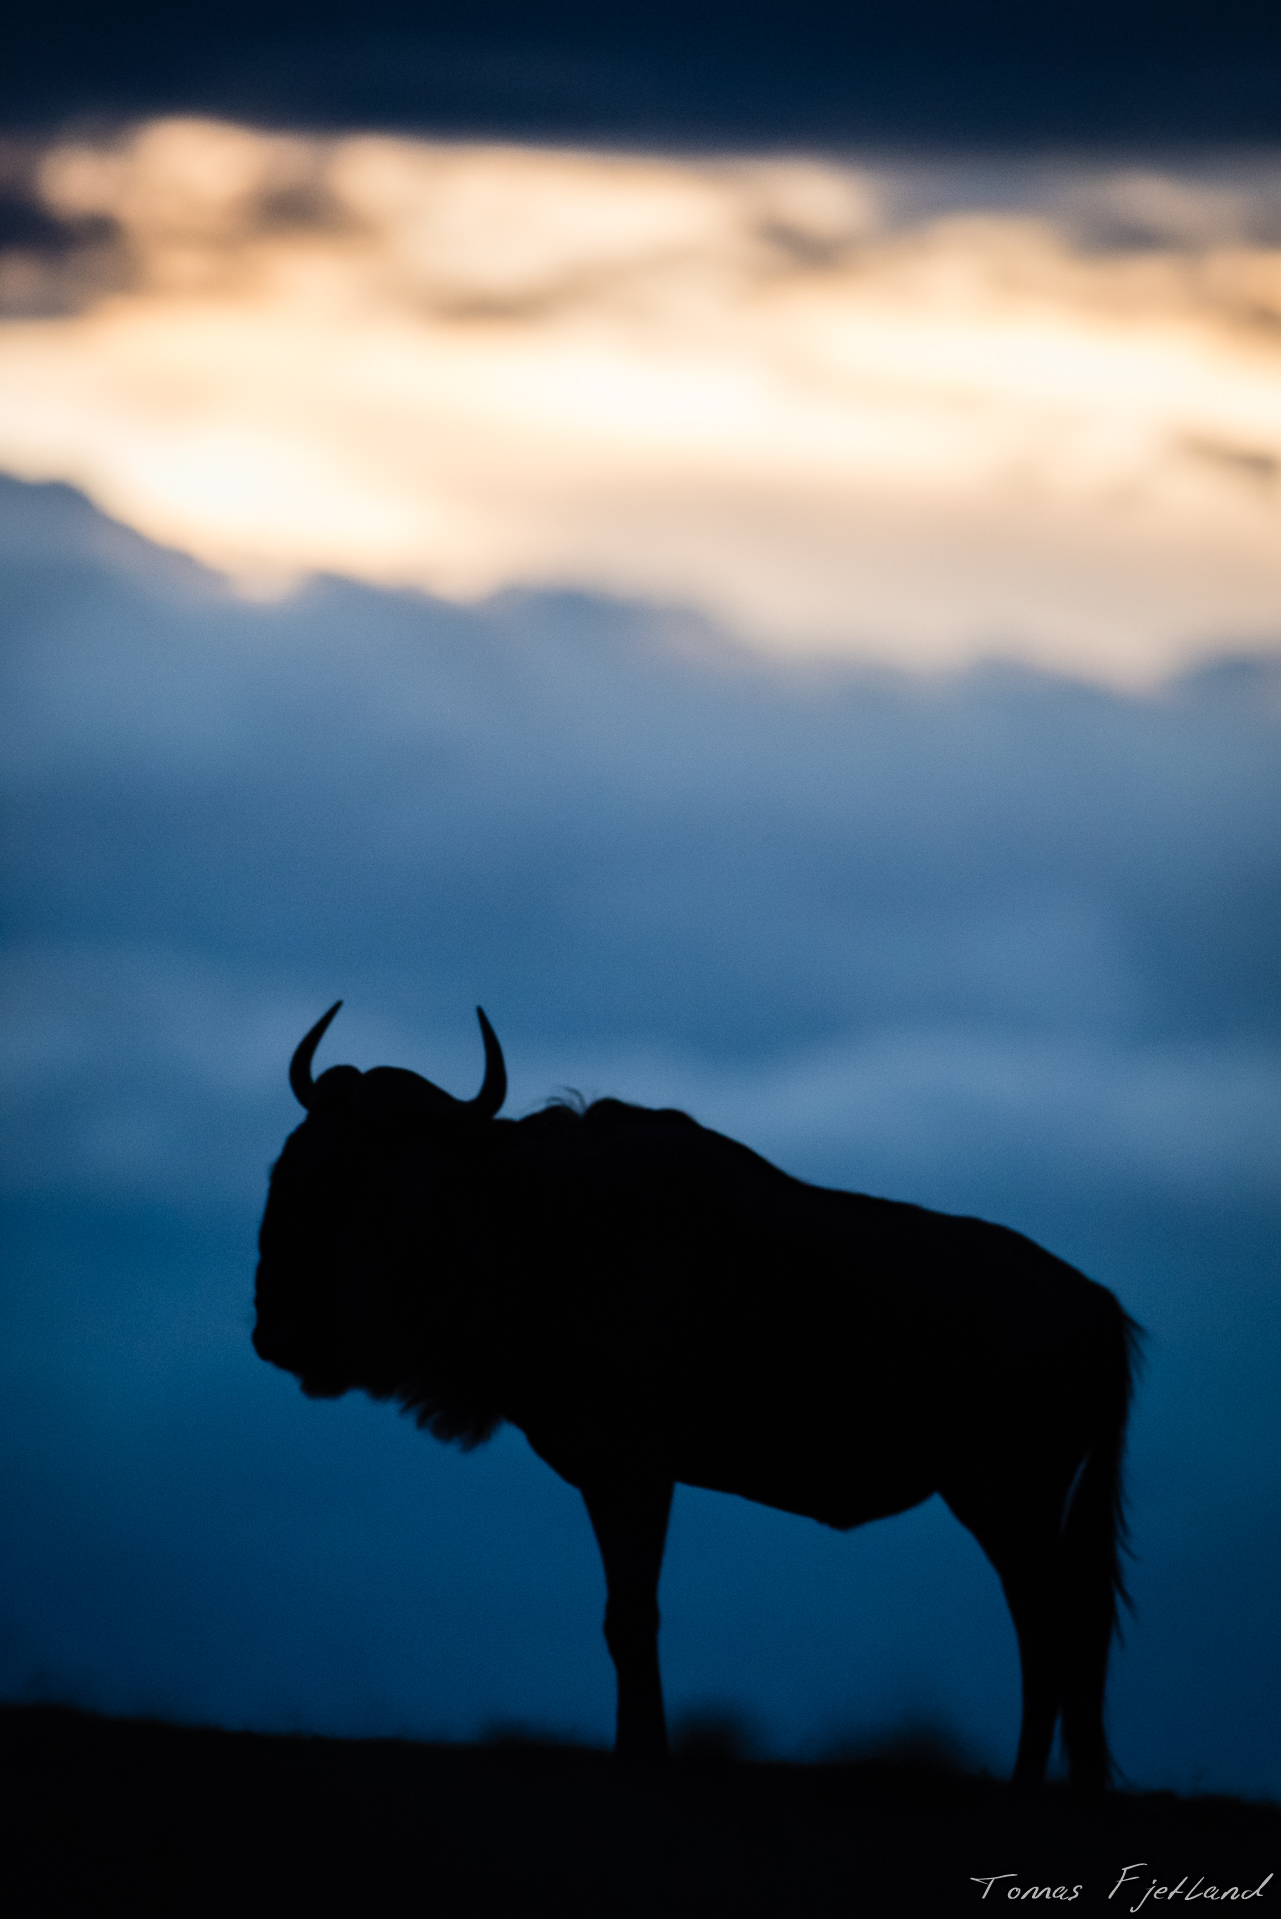 A wildebeest against a cloudy sunset.